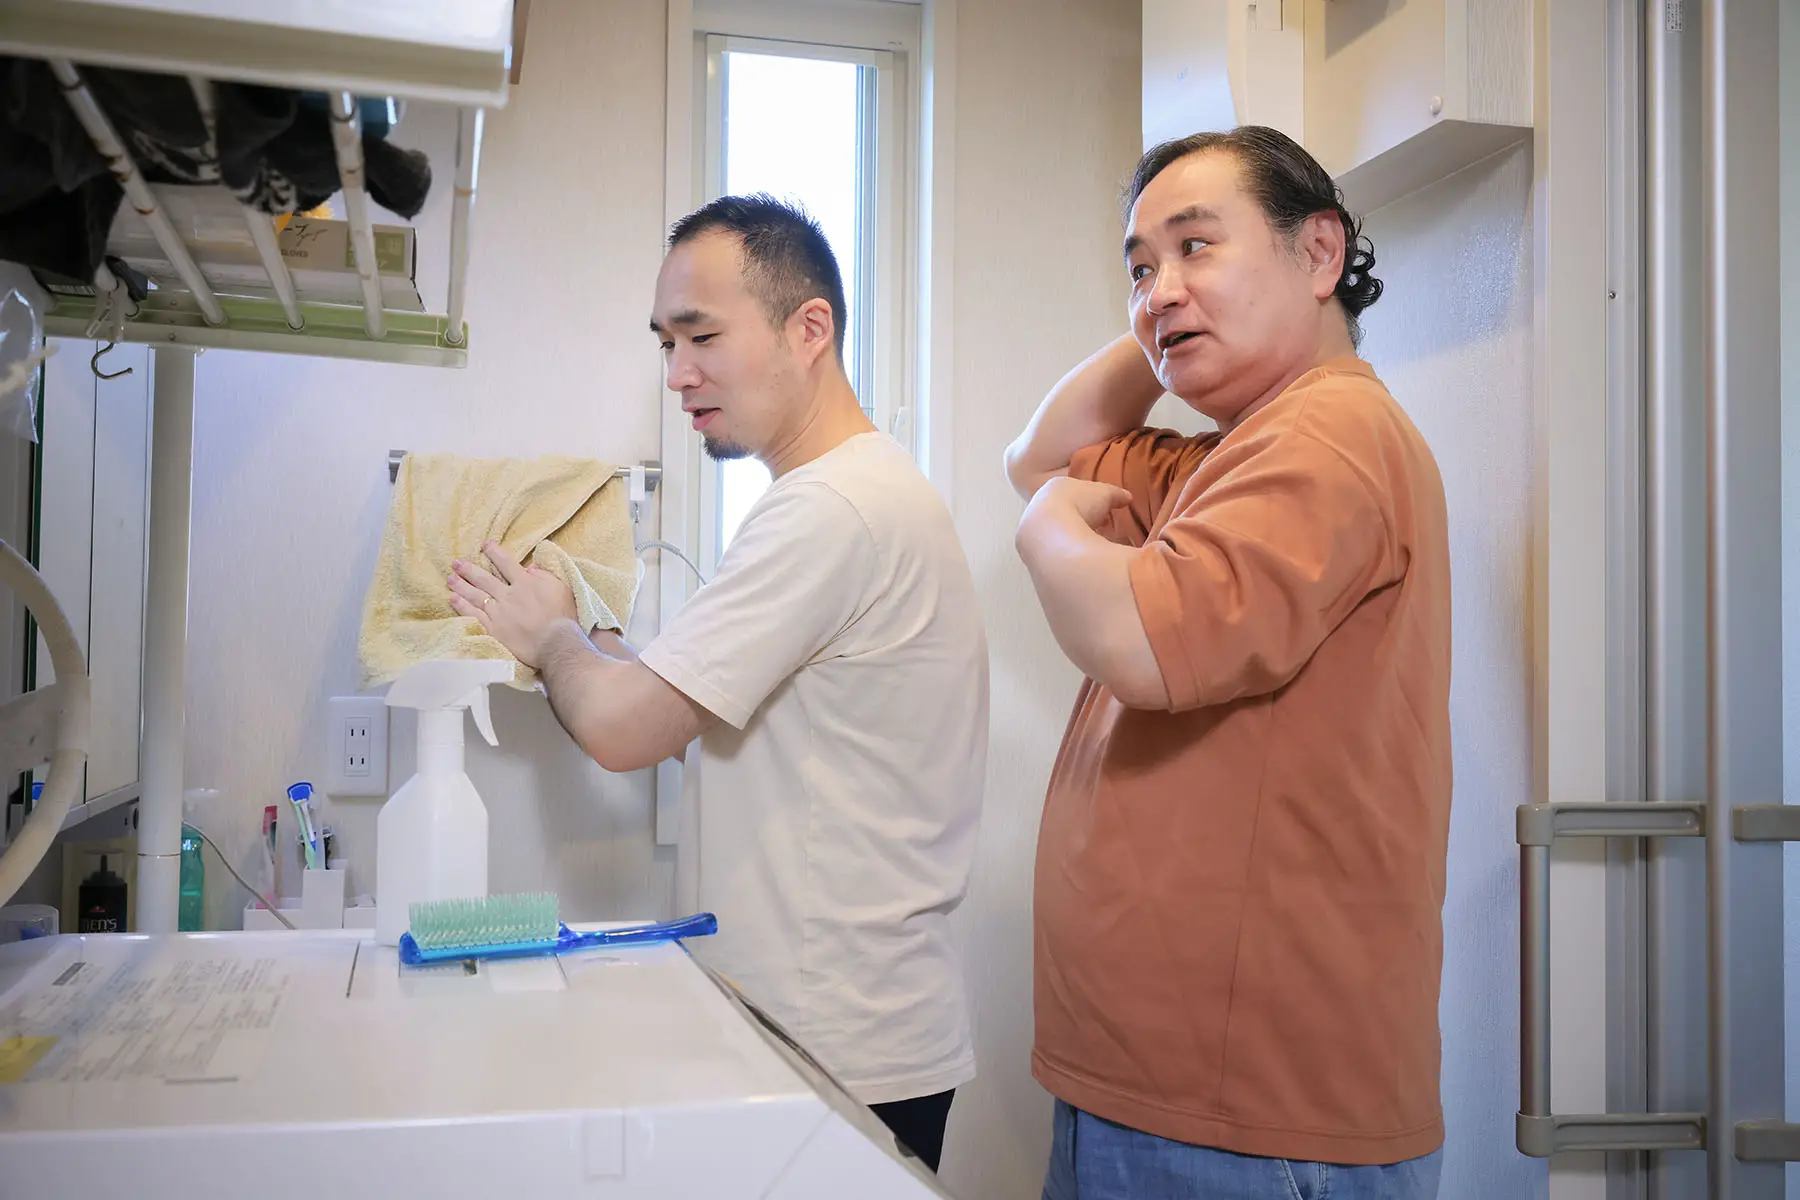 A couple doing their morning bathroom routine. One person is drying his hands, the other is checking his hair.